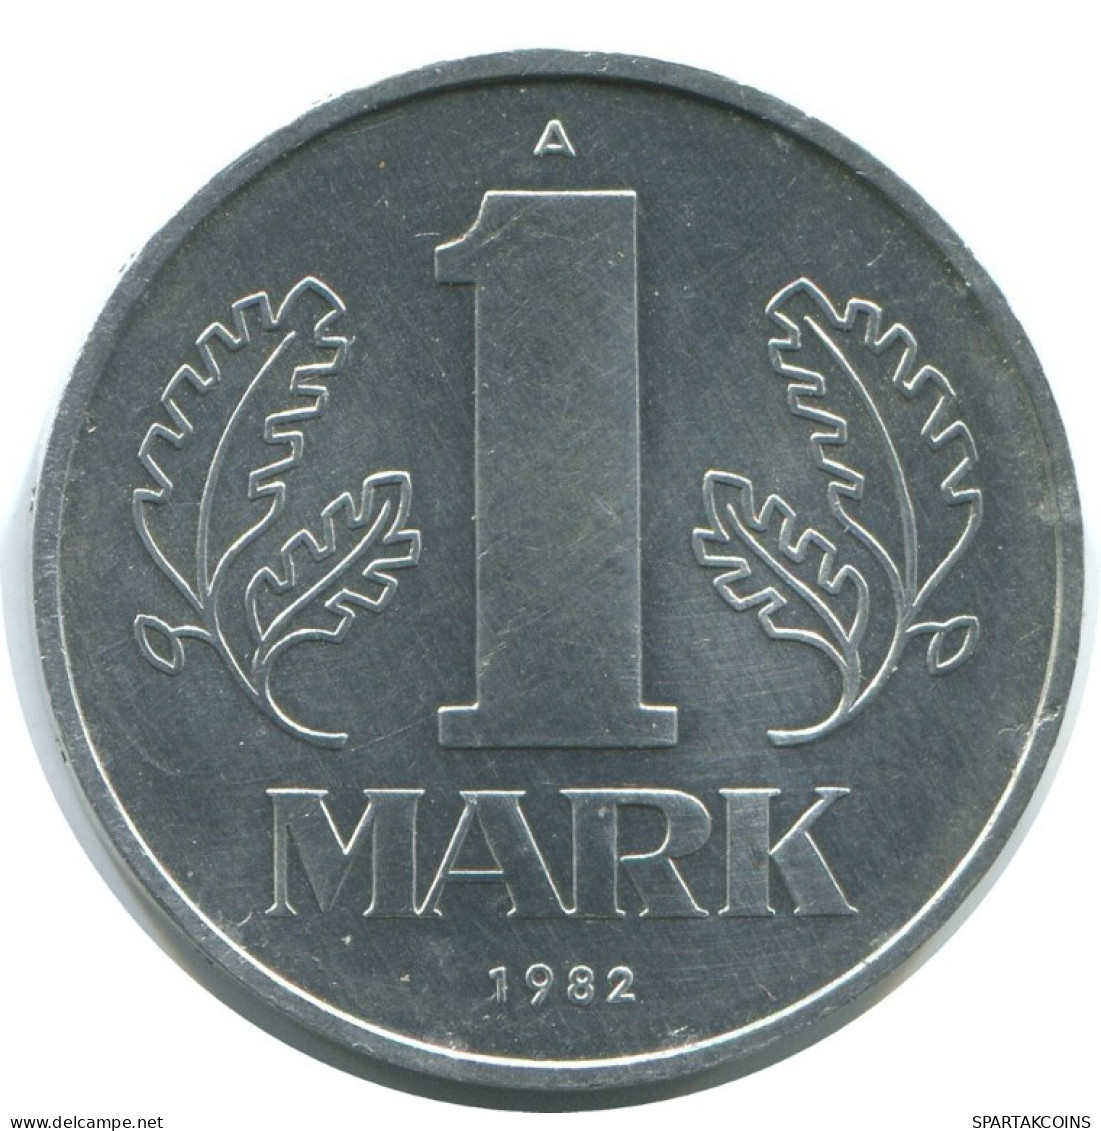 1 MARK 1982 A DDR EAST ALLEMAGNE Pièce GERMANY #AE142.F.A - 1 Mark